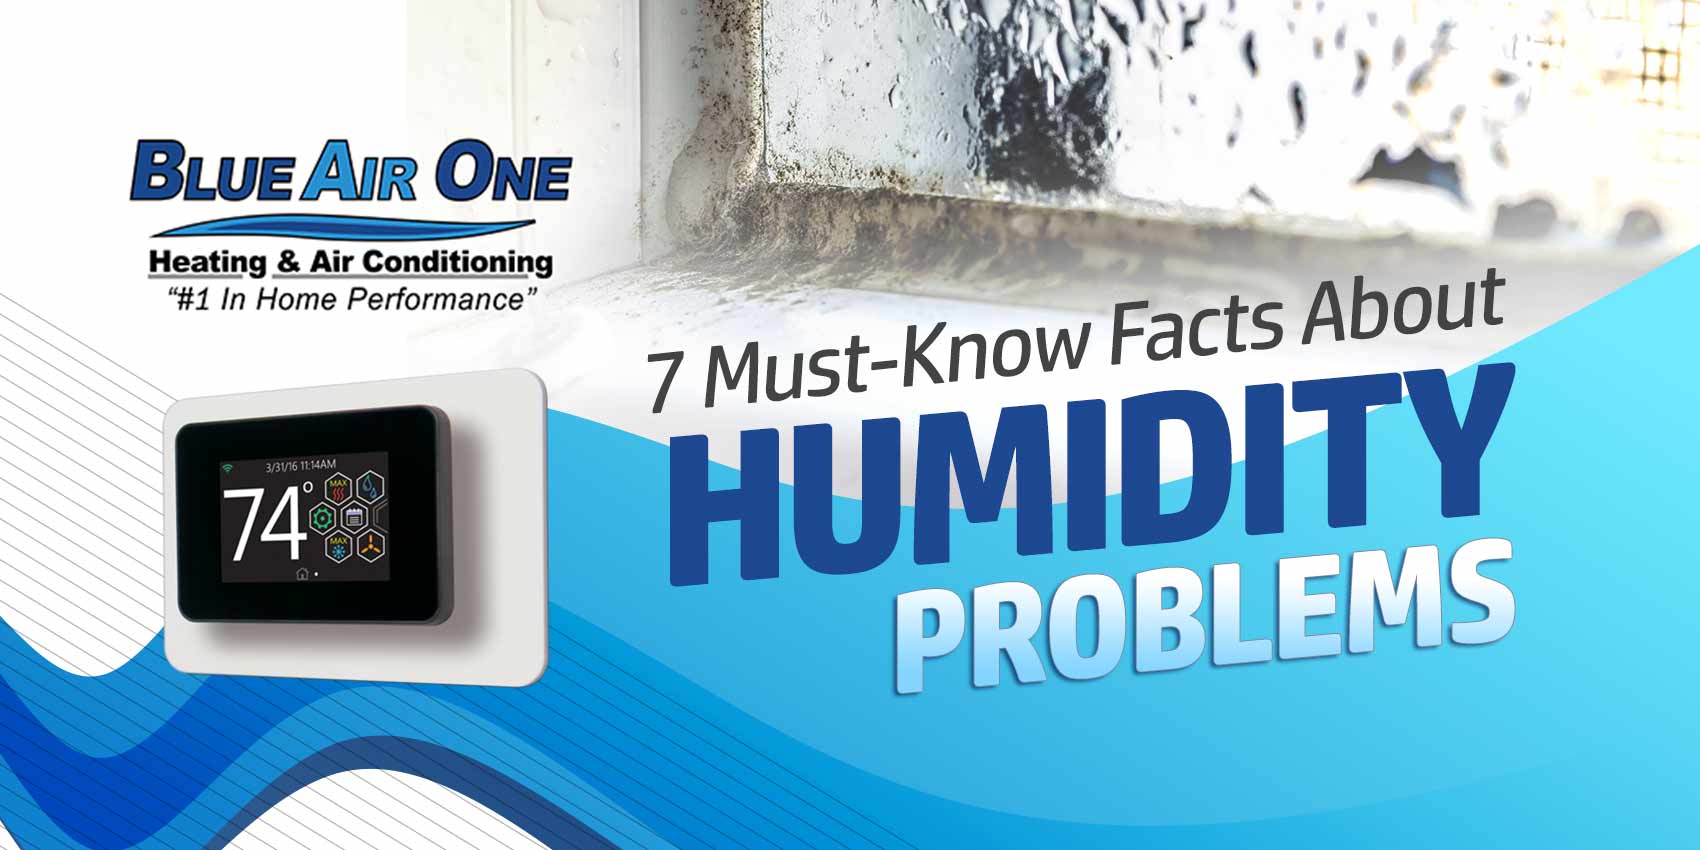 7 Must-Know Facts About Humidity Problems